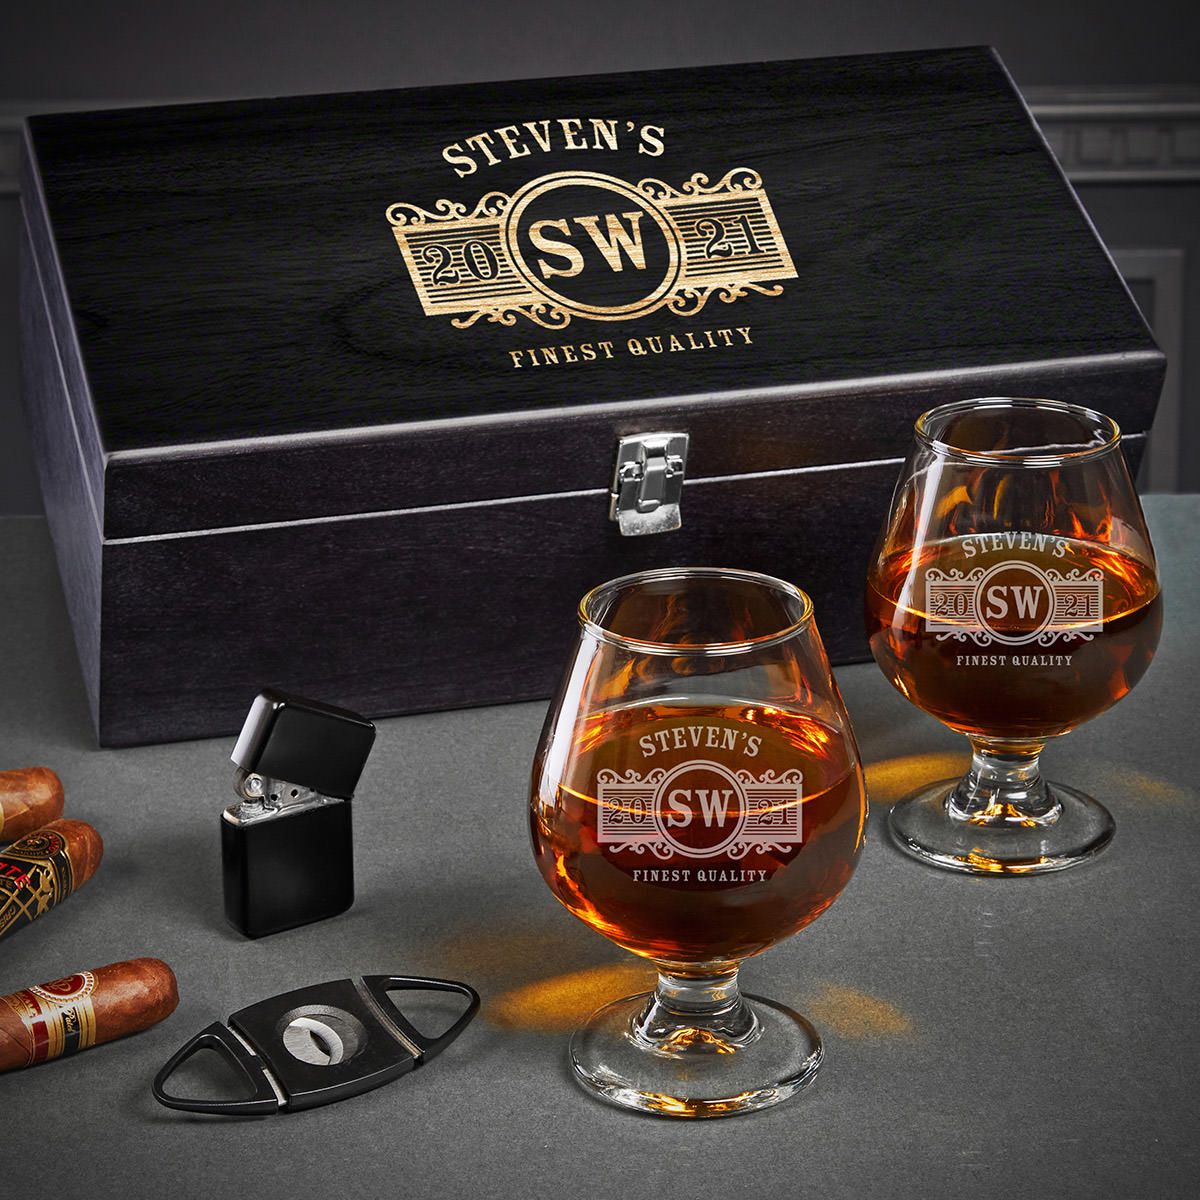 Marquee Engraved Cognac and Cigar Gifts